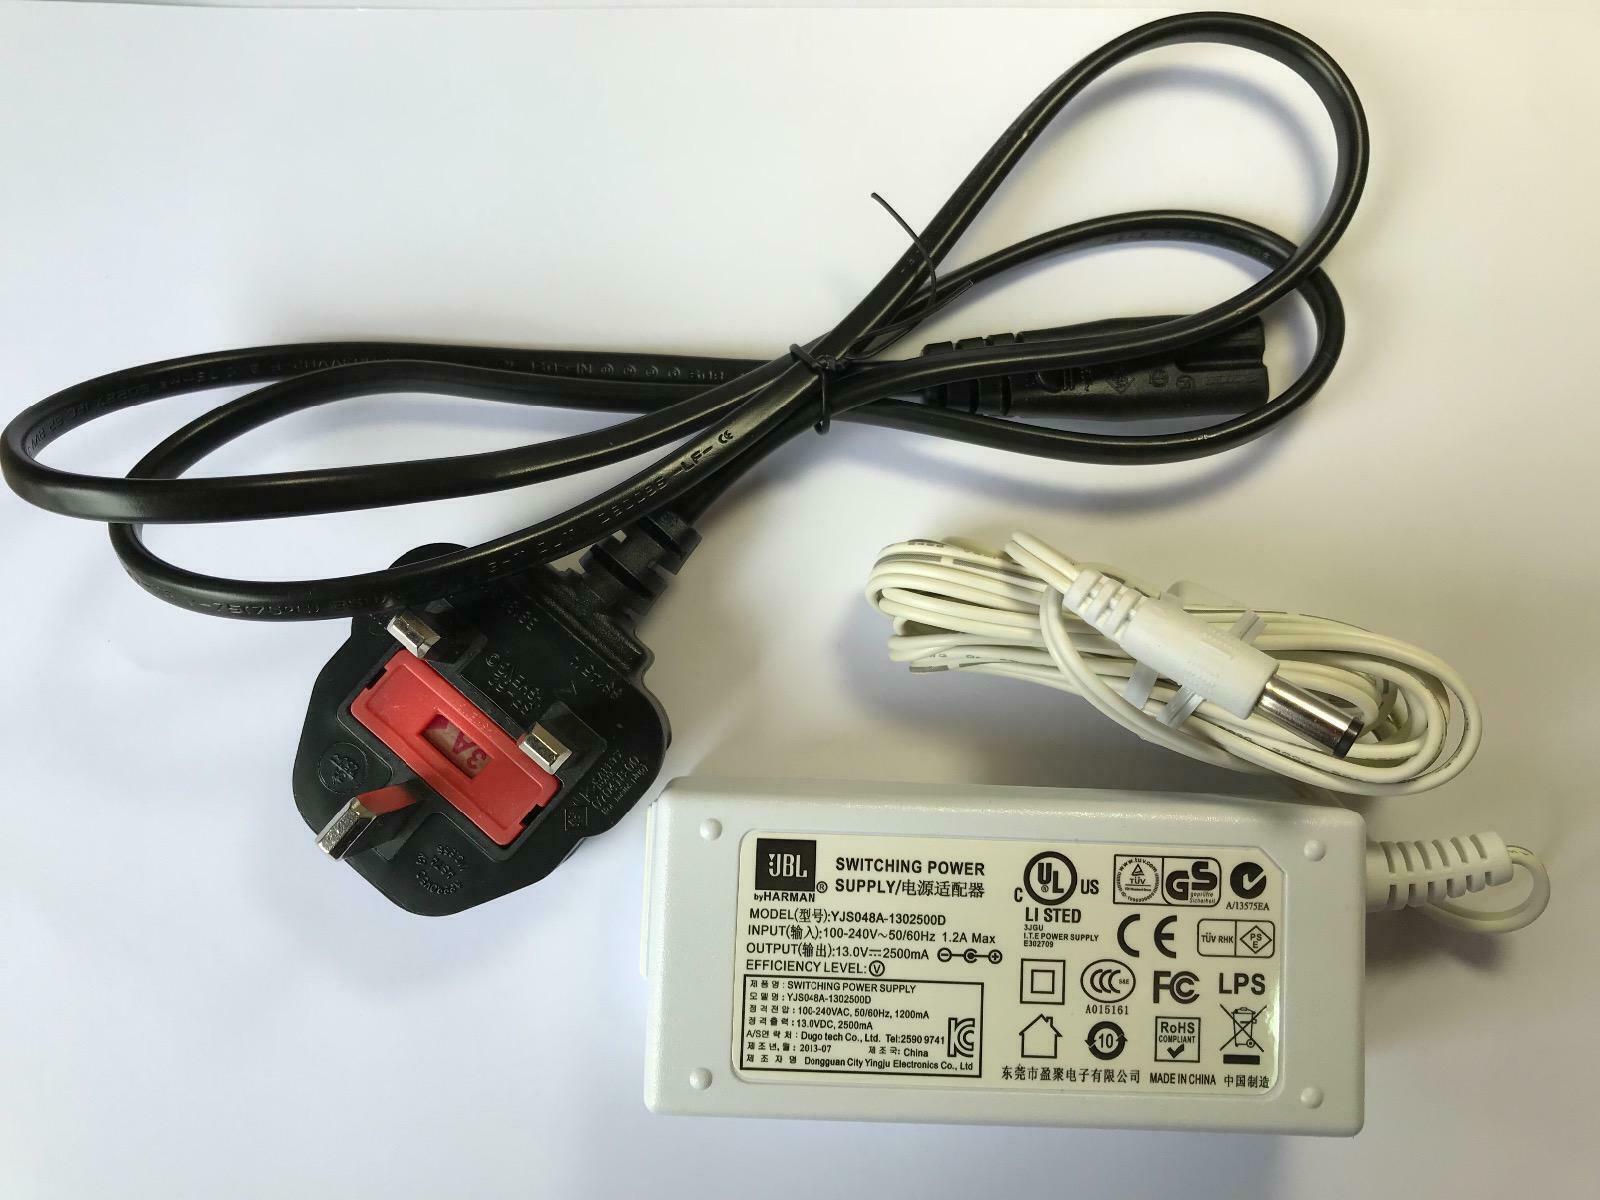 Genuine JBL Switching Power Supply model YJS048A-1302500D 13.0V 2500mA WHITE Brand: jujin Manufacturer Warranty: 1 ye - Click Image to Close